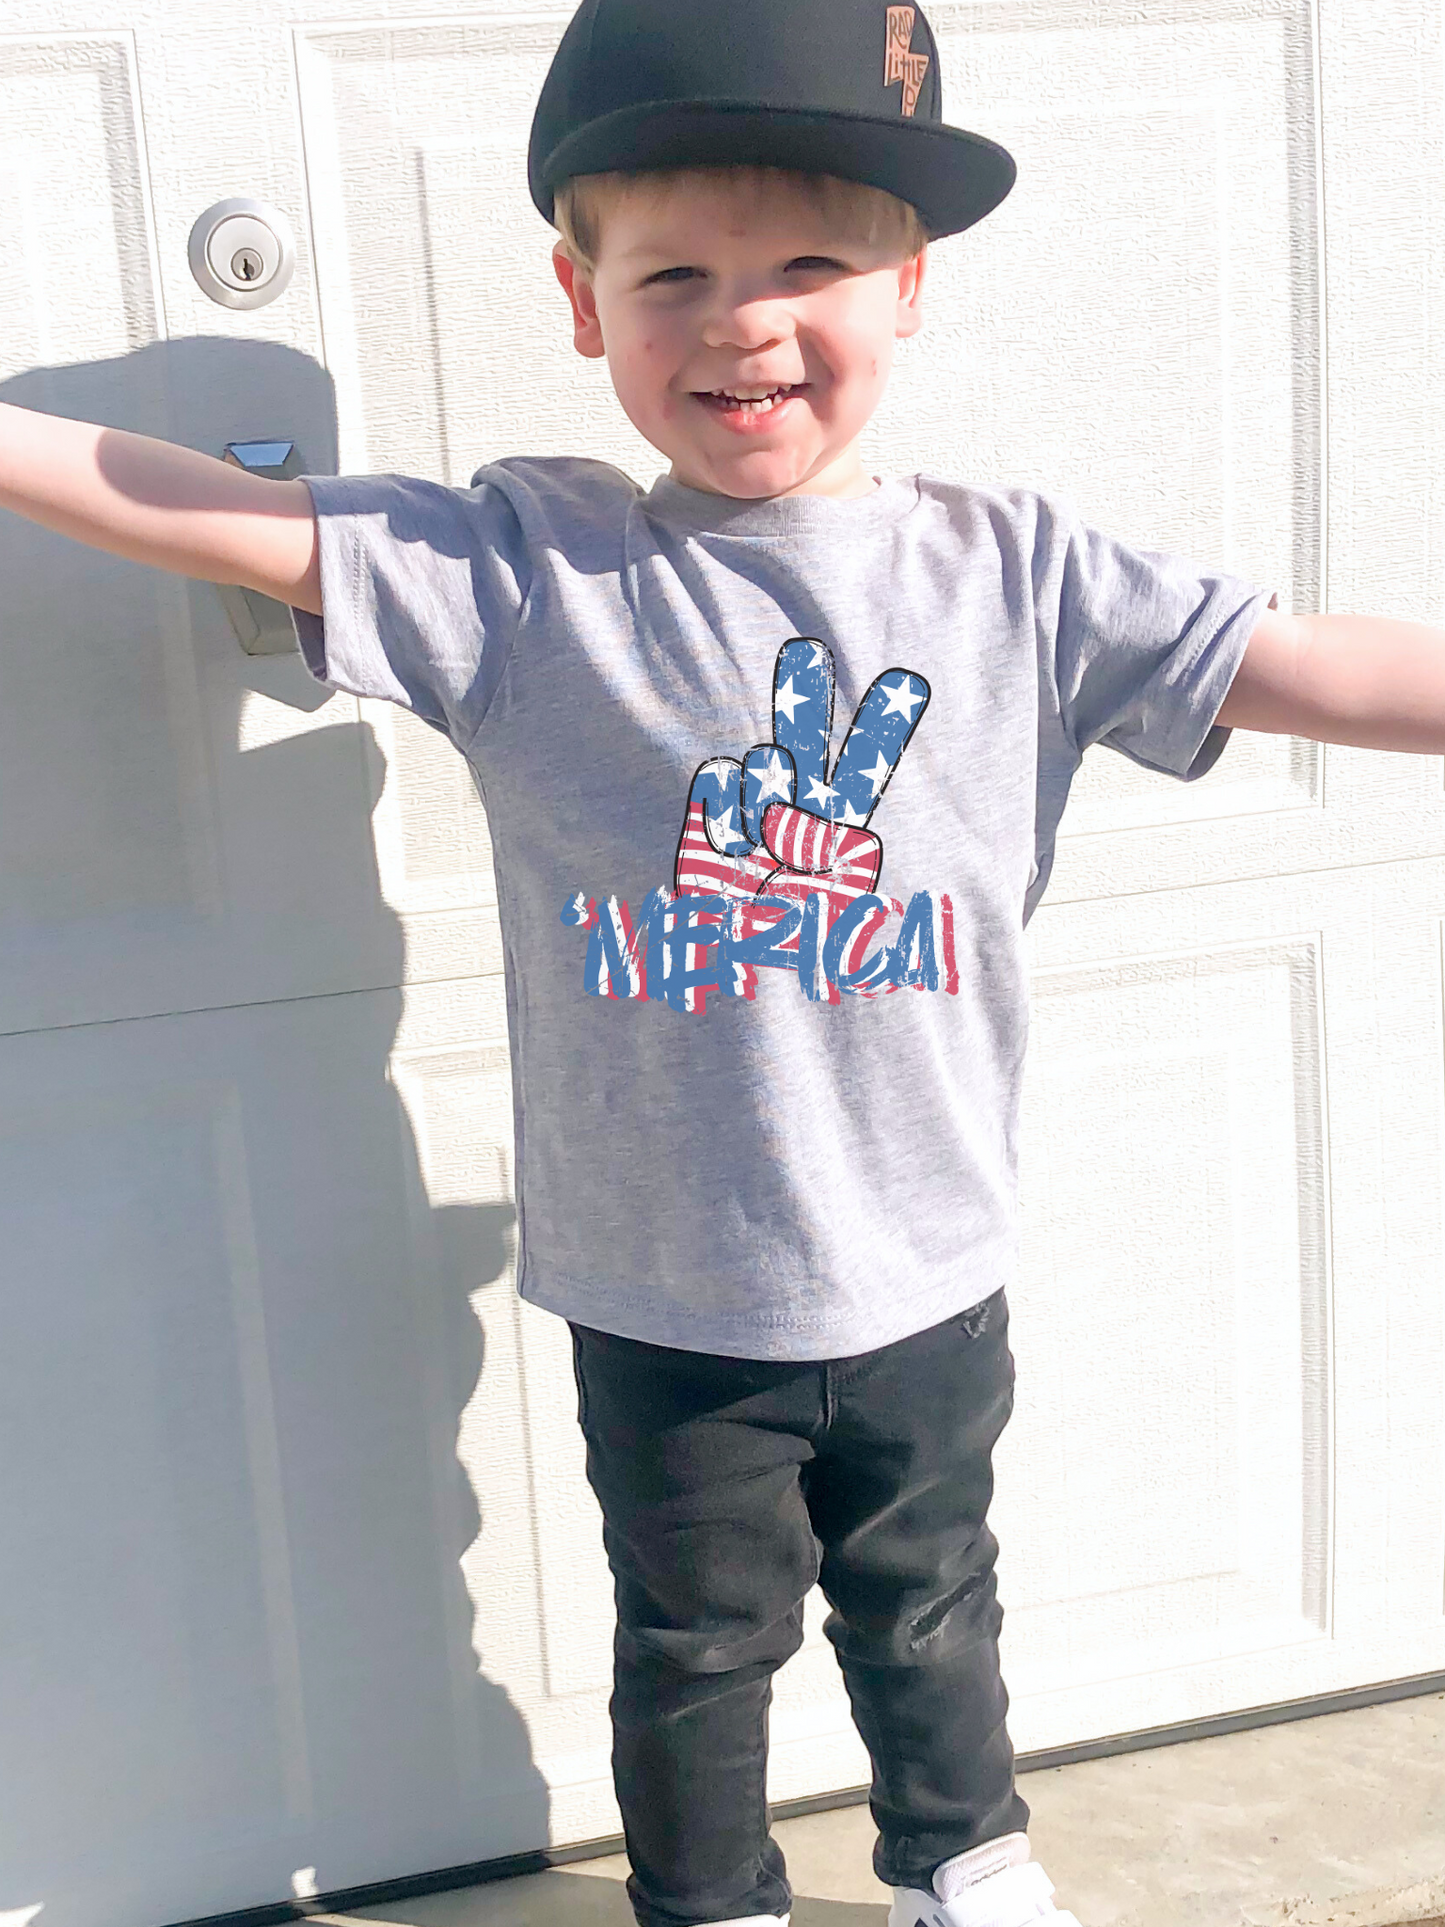 'Merica Toddler and Infant Tee